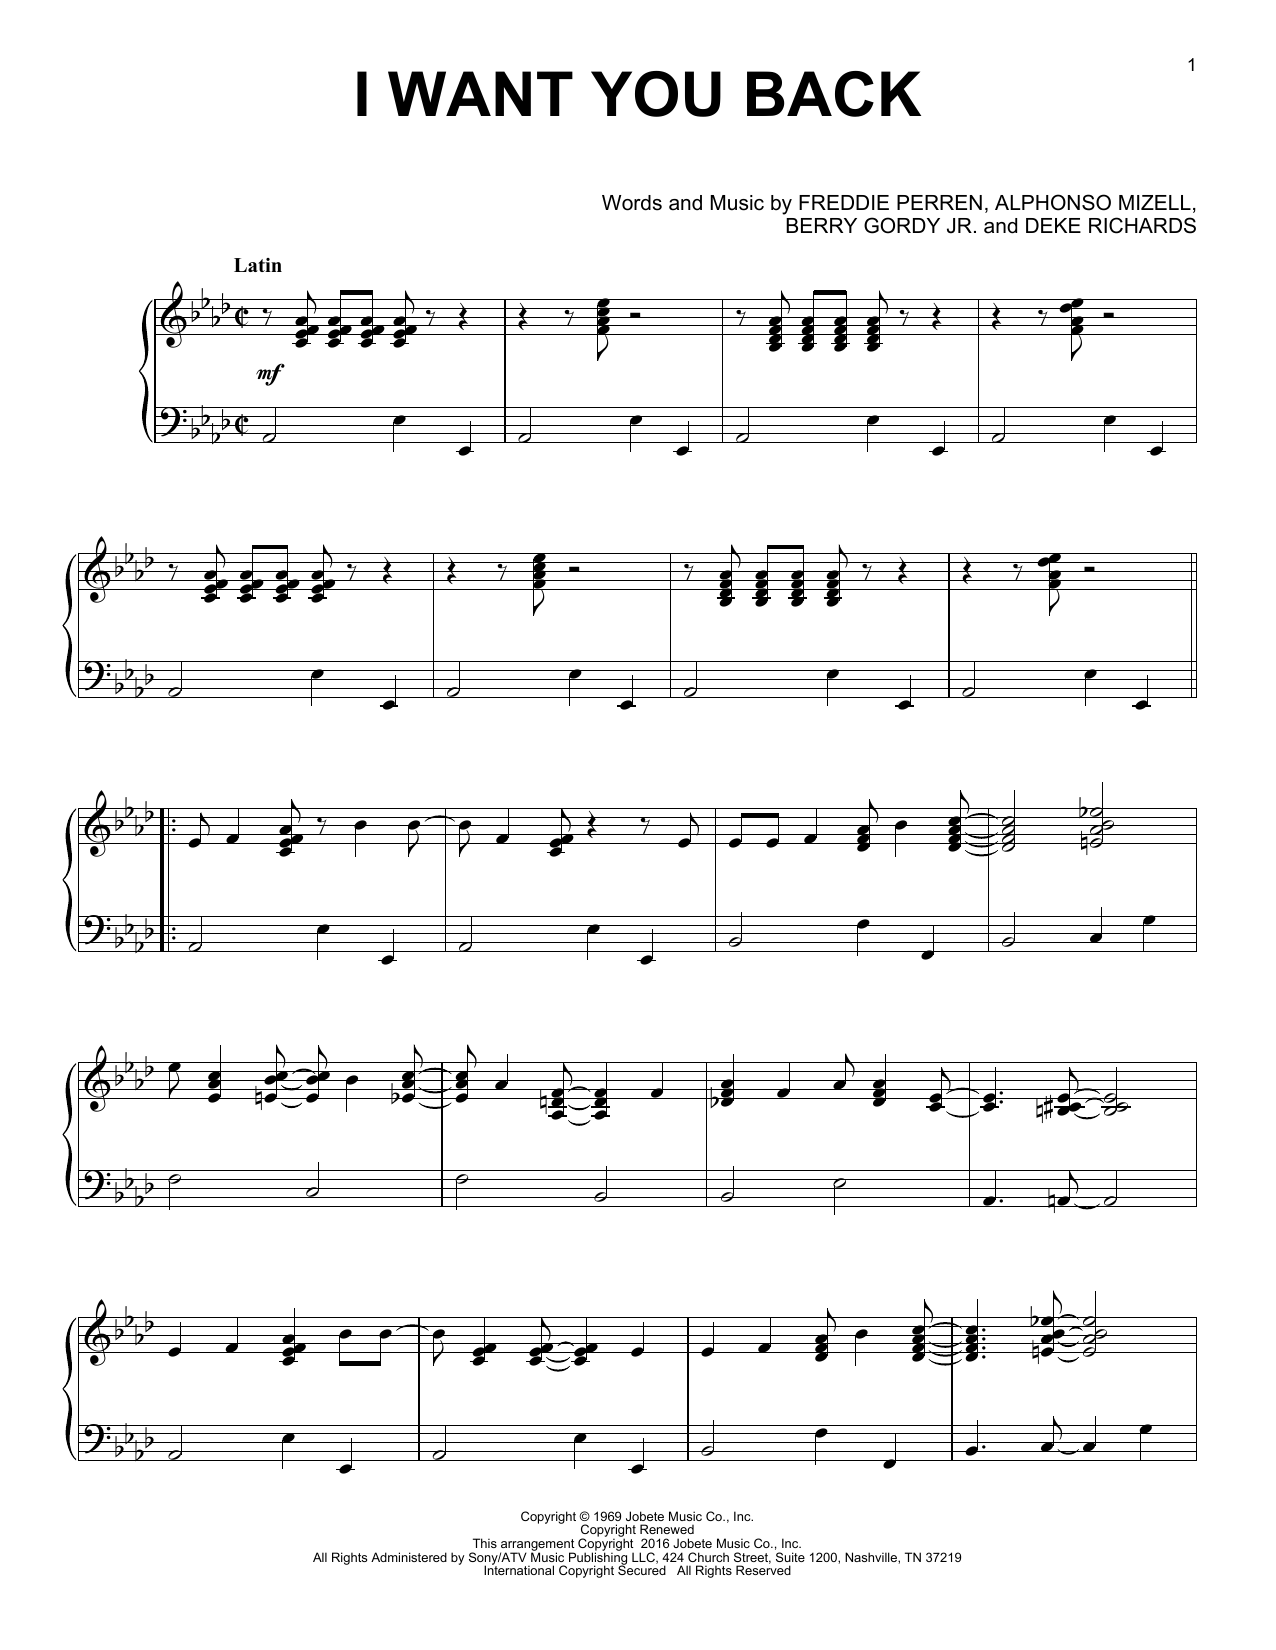 Download The Jackson 5 I Want You Back [Jazz version] Sheet Music